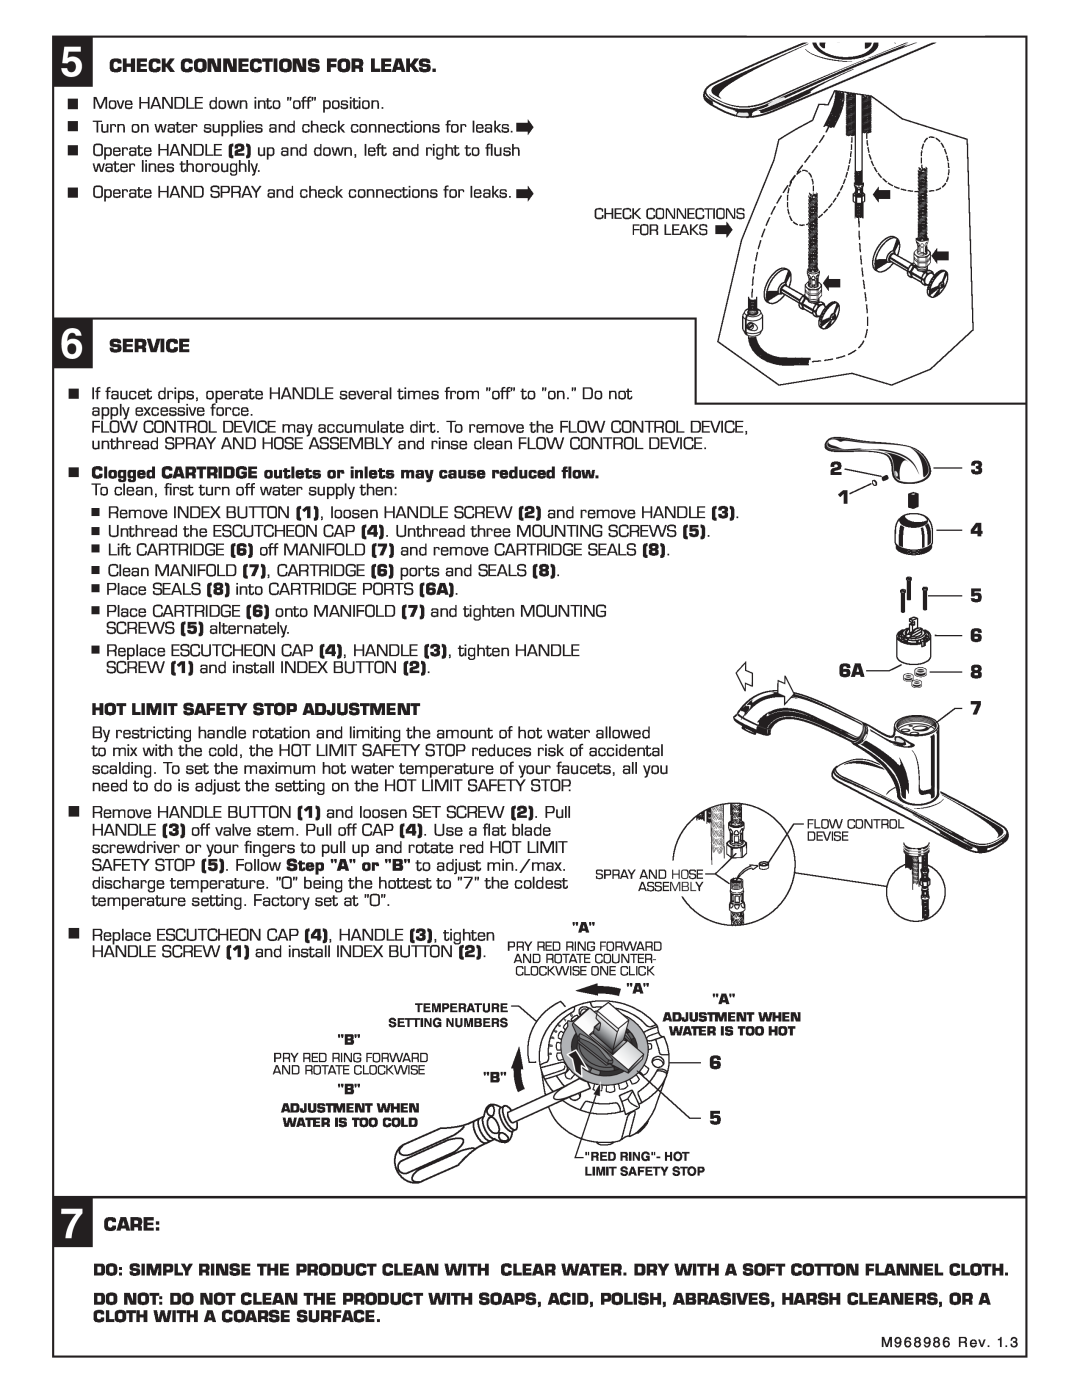 American Standard 4175.1 Check Connections For Leaks, Service, Care, Hot Limit Safety Stop Adjustment 